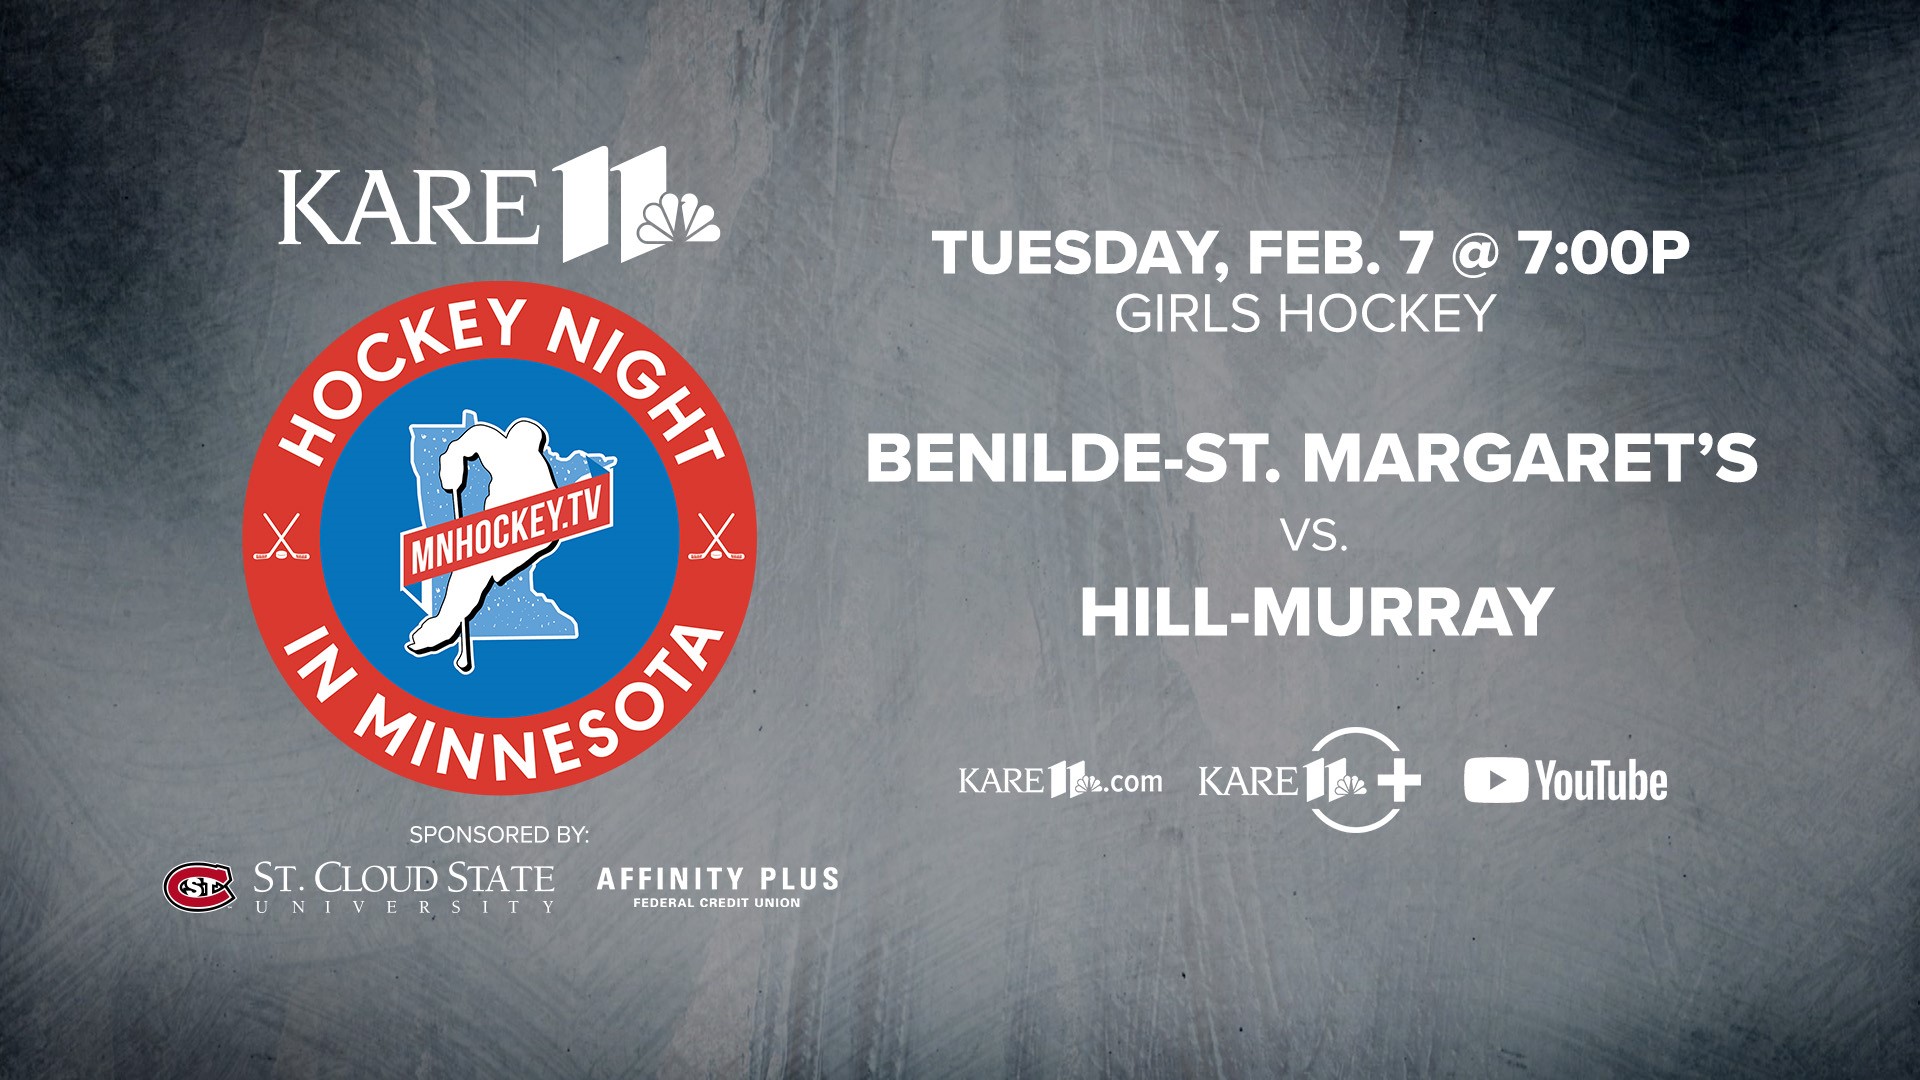 Benilde-St. Margaret's faces off against Hill-Murray in the live girls high school hockey stream Tuesday, Feb. 7.